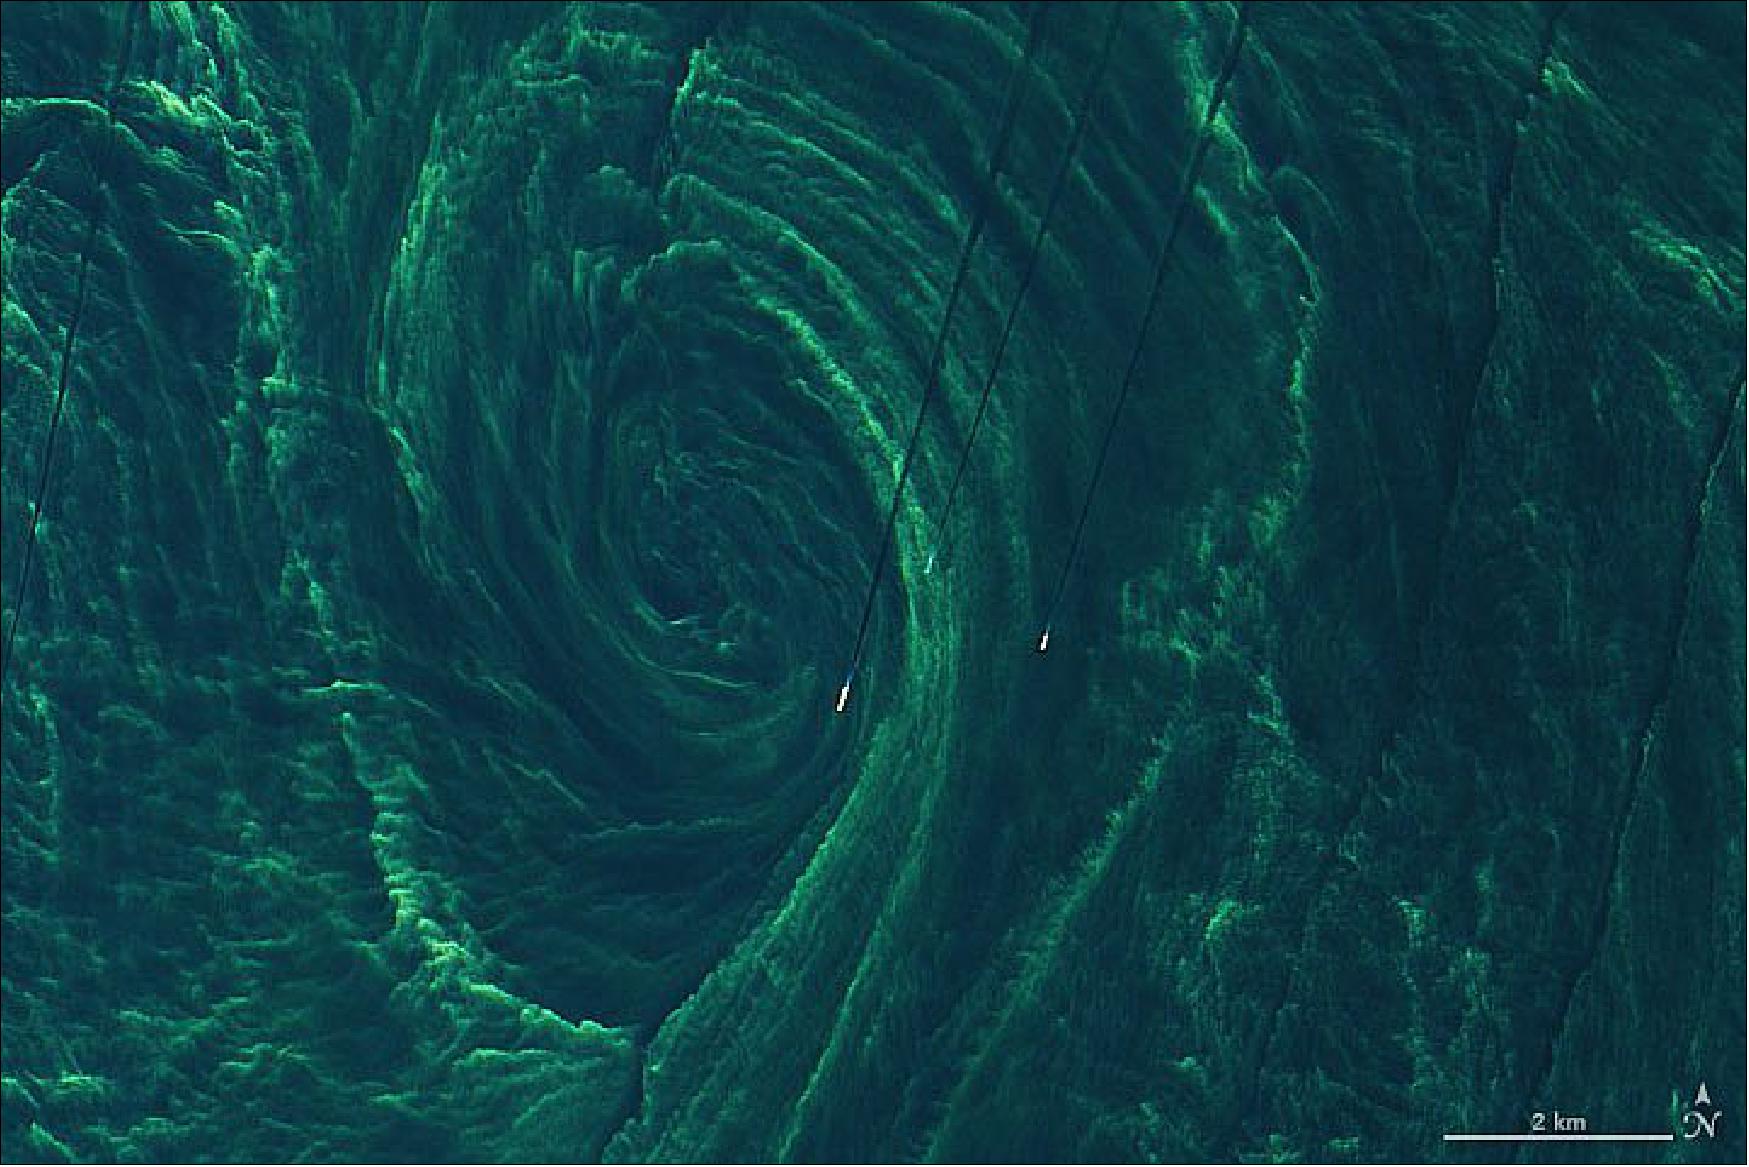 Figure 48: These natural-color images, acquired on August 15, 2020, with the Operational Land Imager (OLI) on Landsat 8, show a late-summer phytoplankton bloom swirling in the Baltic Sea. The images feature part of a bloom located between Öland and Gotland, two islands off the coast of southeast Sweden. Note the dark, straight lines crossing the detailed image: these are the wakes of ships cutting through the bloom (image credit: NASA Earth Observatory images by Joshua Stevens, using Landsat data from the U.S. Geological Survey. Story by Kathryn Hansen, with image interpretation by Norman Kuring/NASA GSFC, Ajit Subramaniam/LDEO/Columbia University, and Maren Voss/Leibniz Institute for Baltic Sea Research Warnemuende)